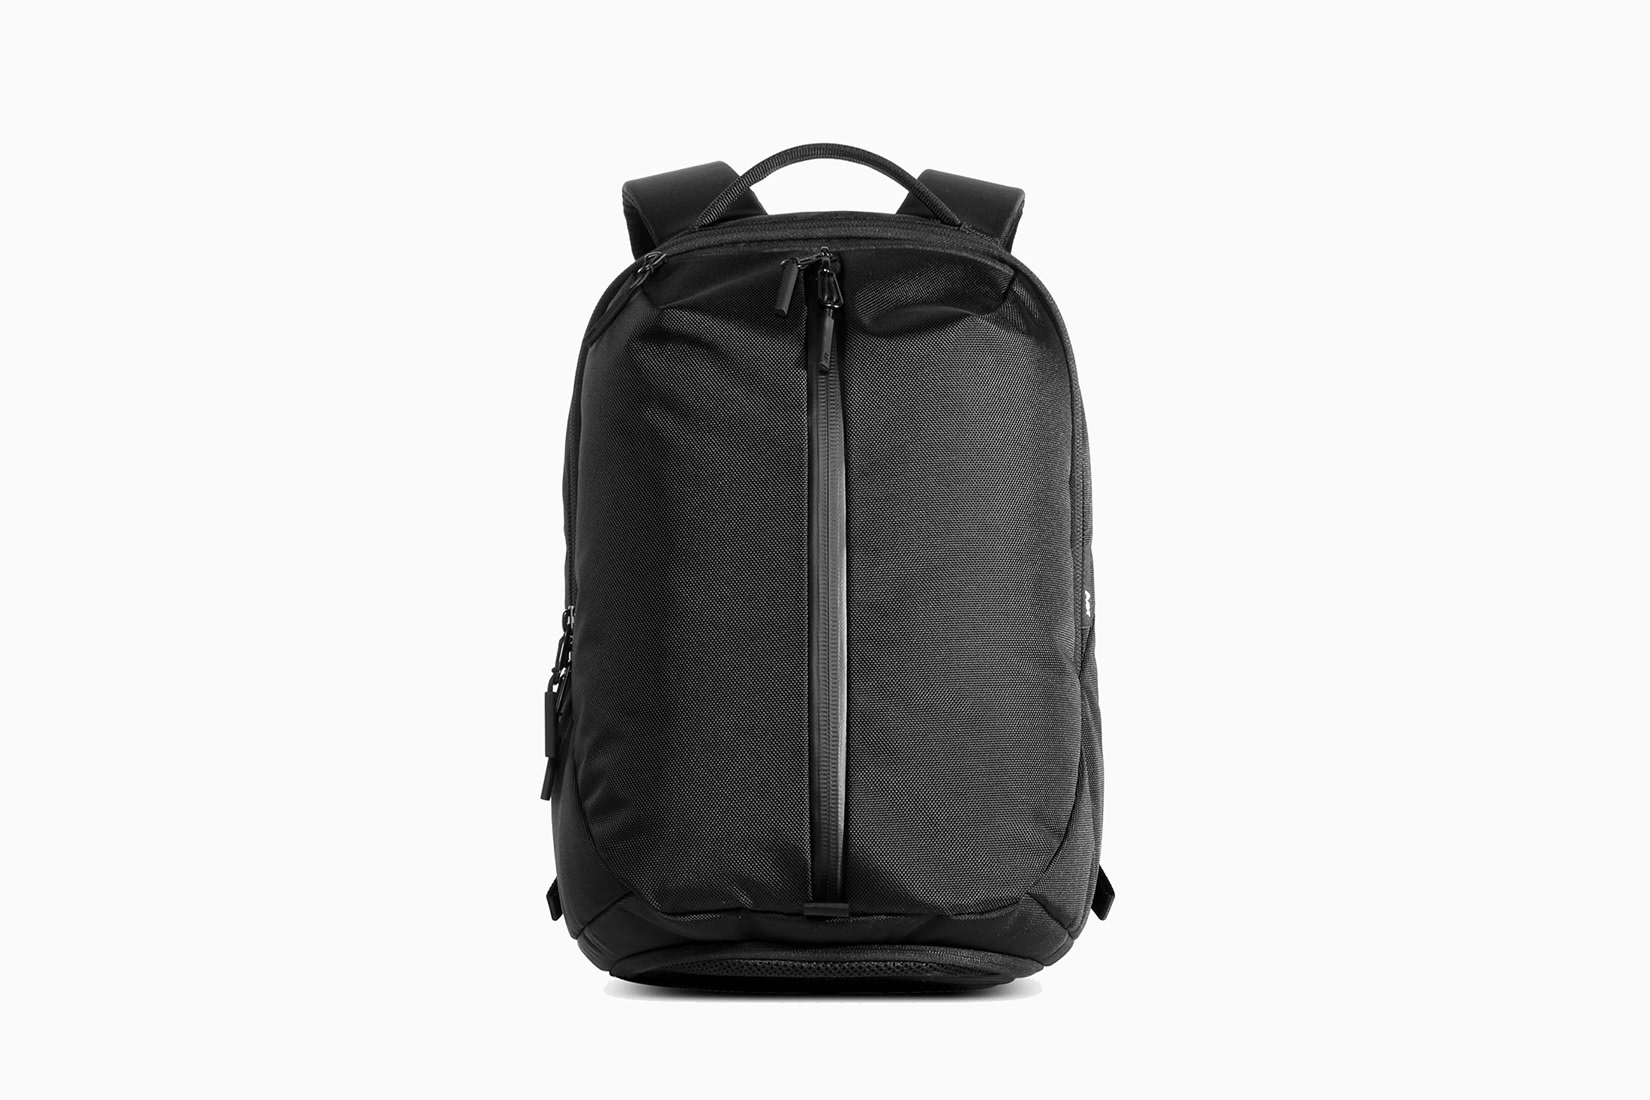 23 Best EDC Backpacks: Top Everyday Carry Bags For Men (2020)